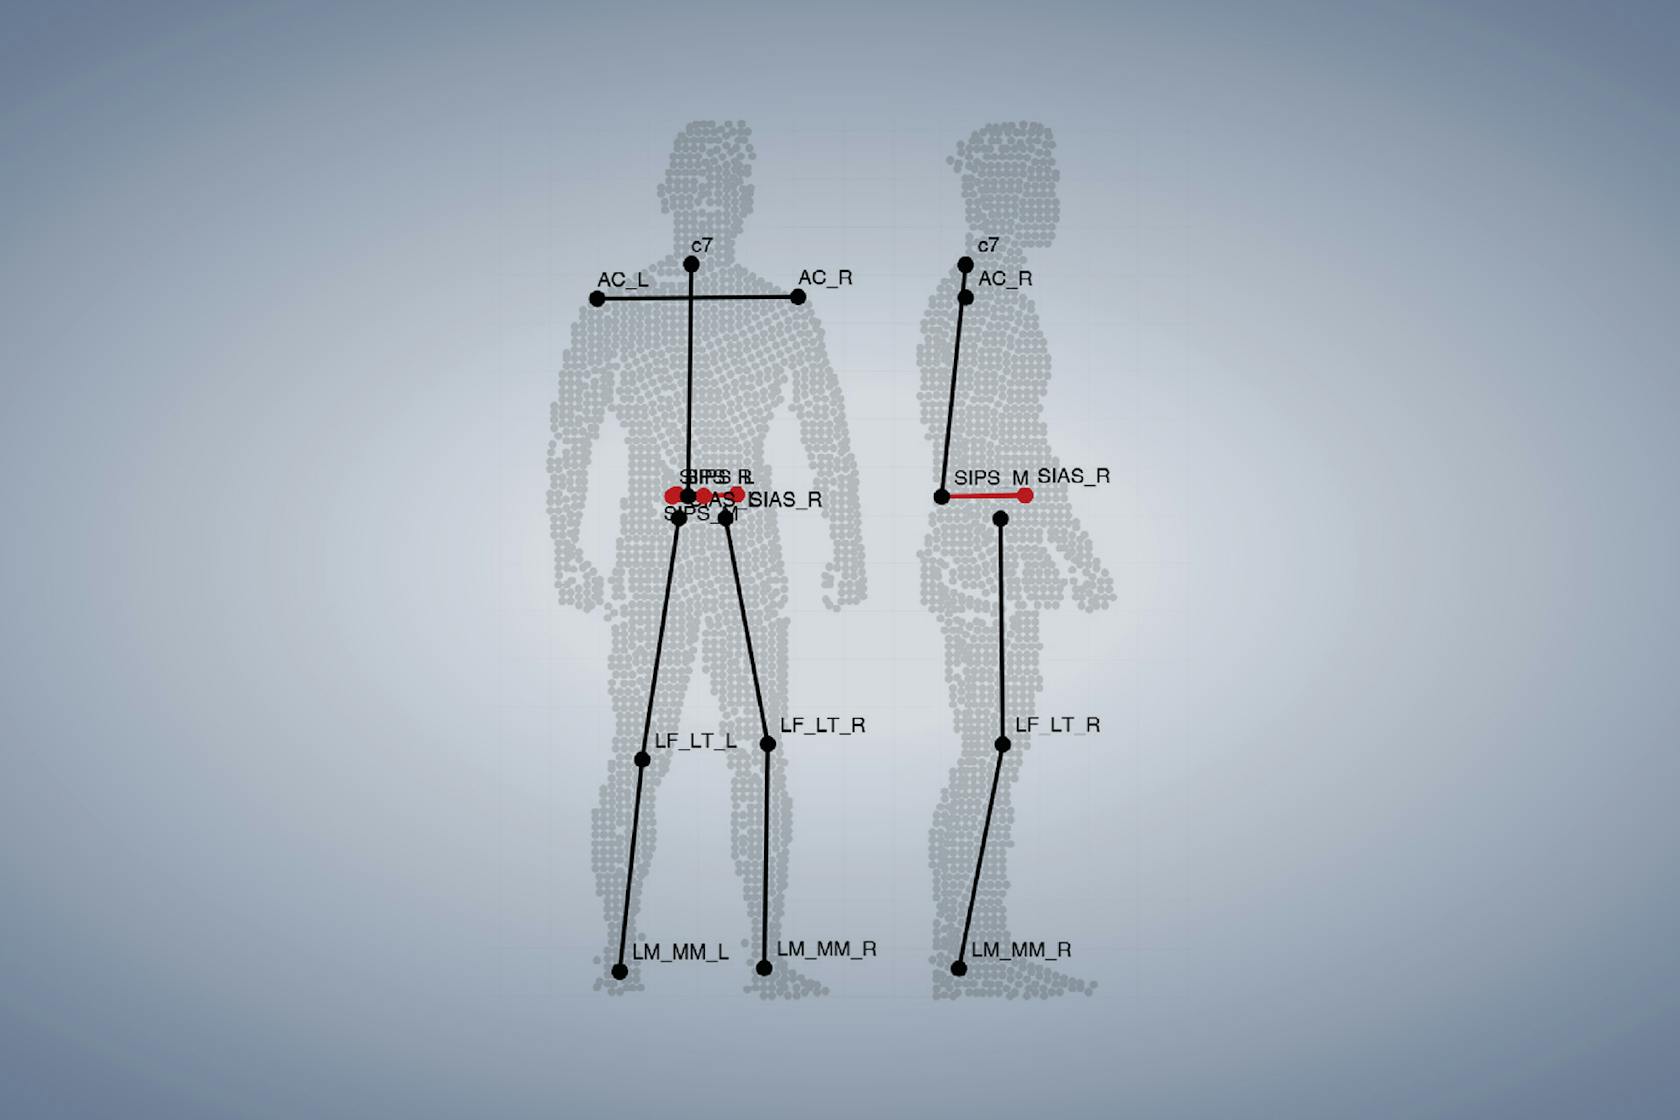 High-precision body measurement with the full-body scanner.